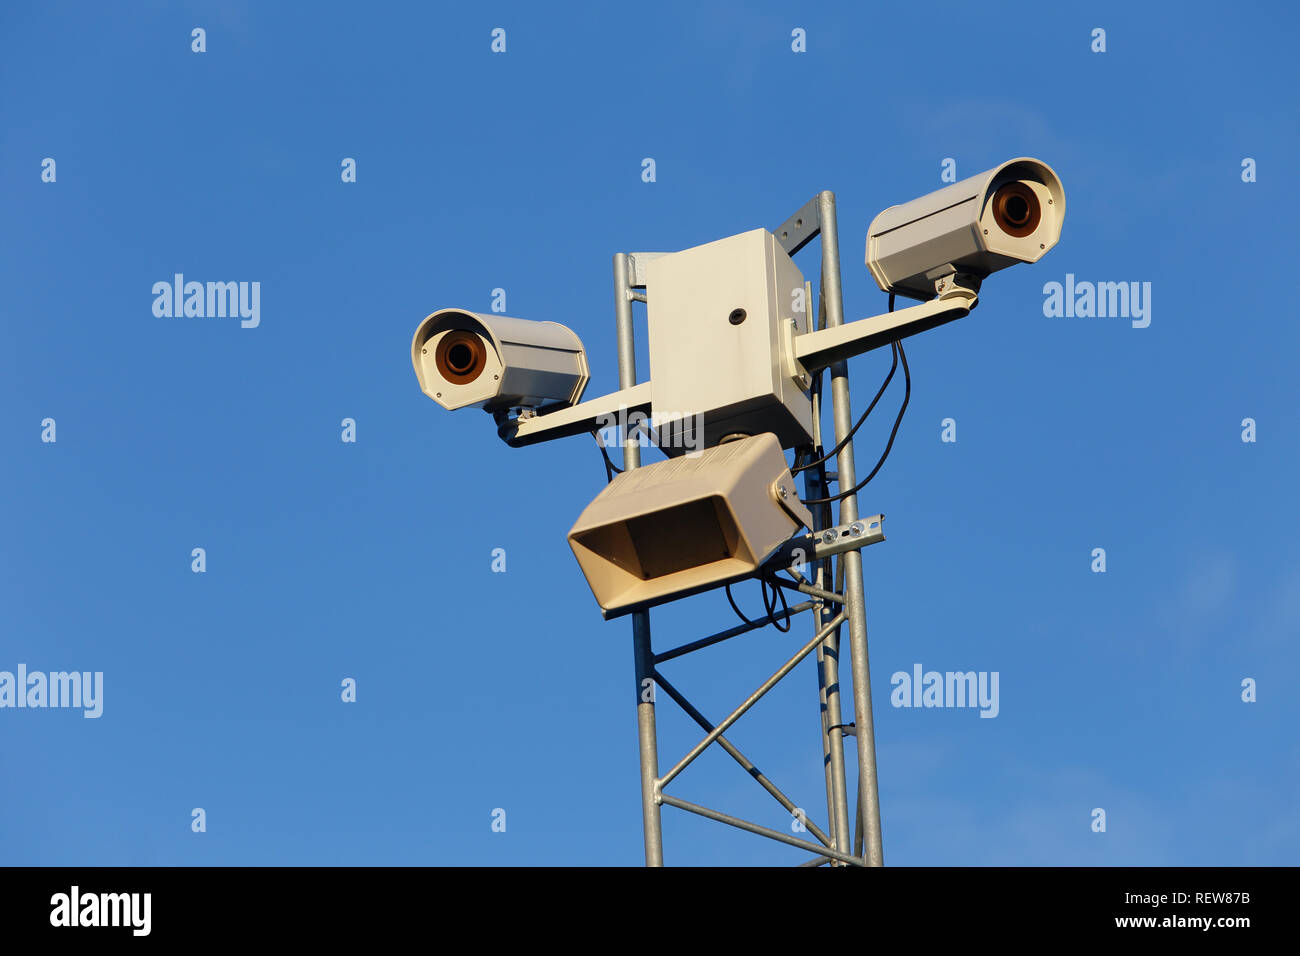 Low angel view of two outdoor surveillance cameras against a blue sky. Stock Photo